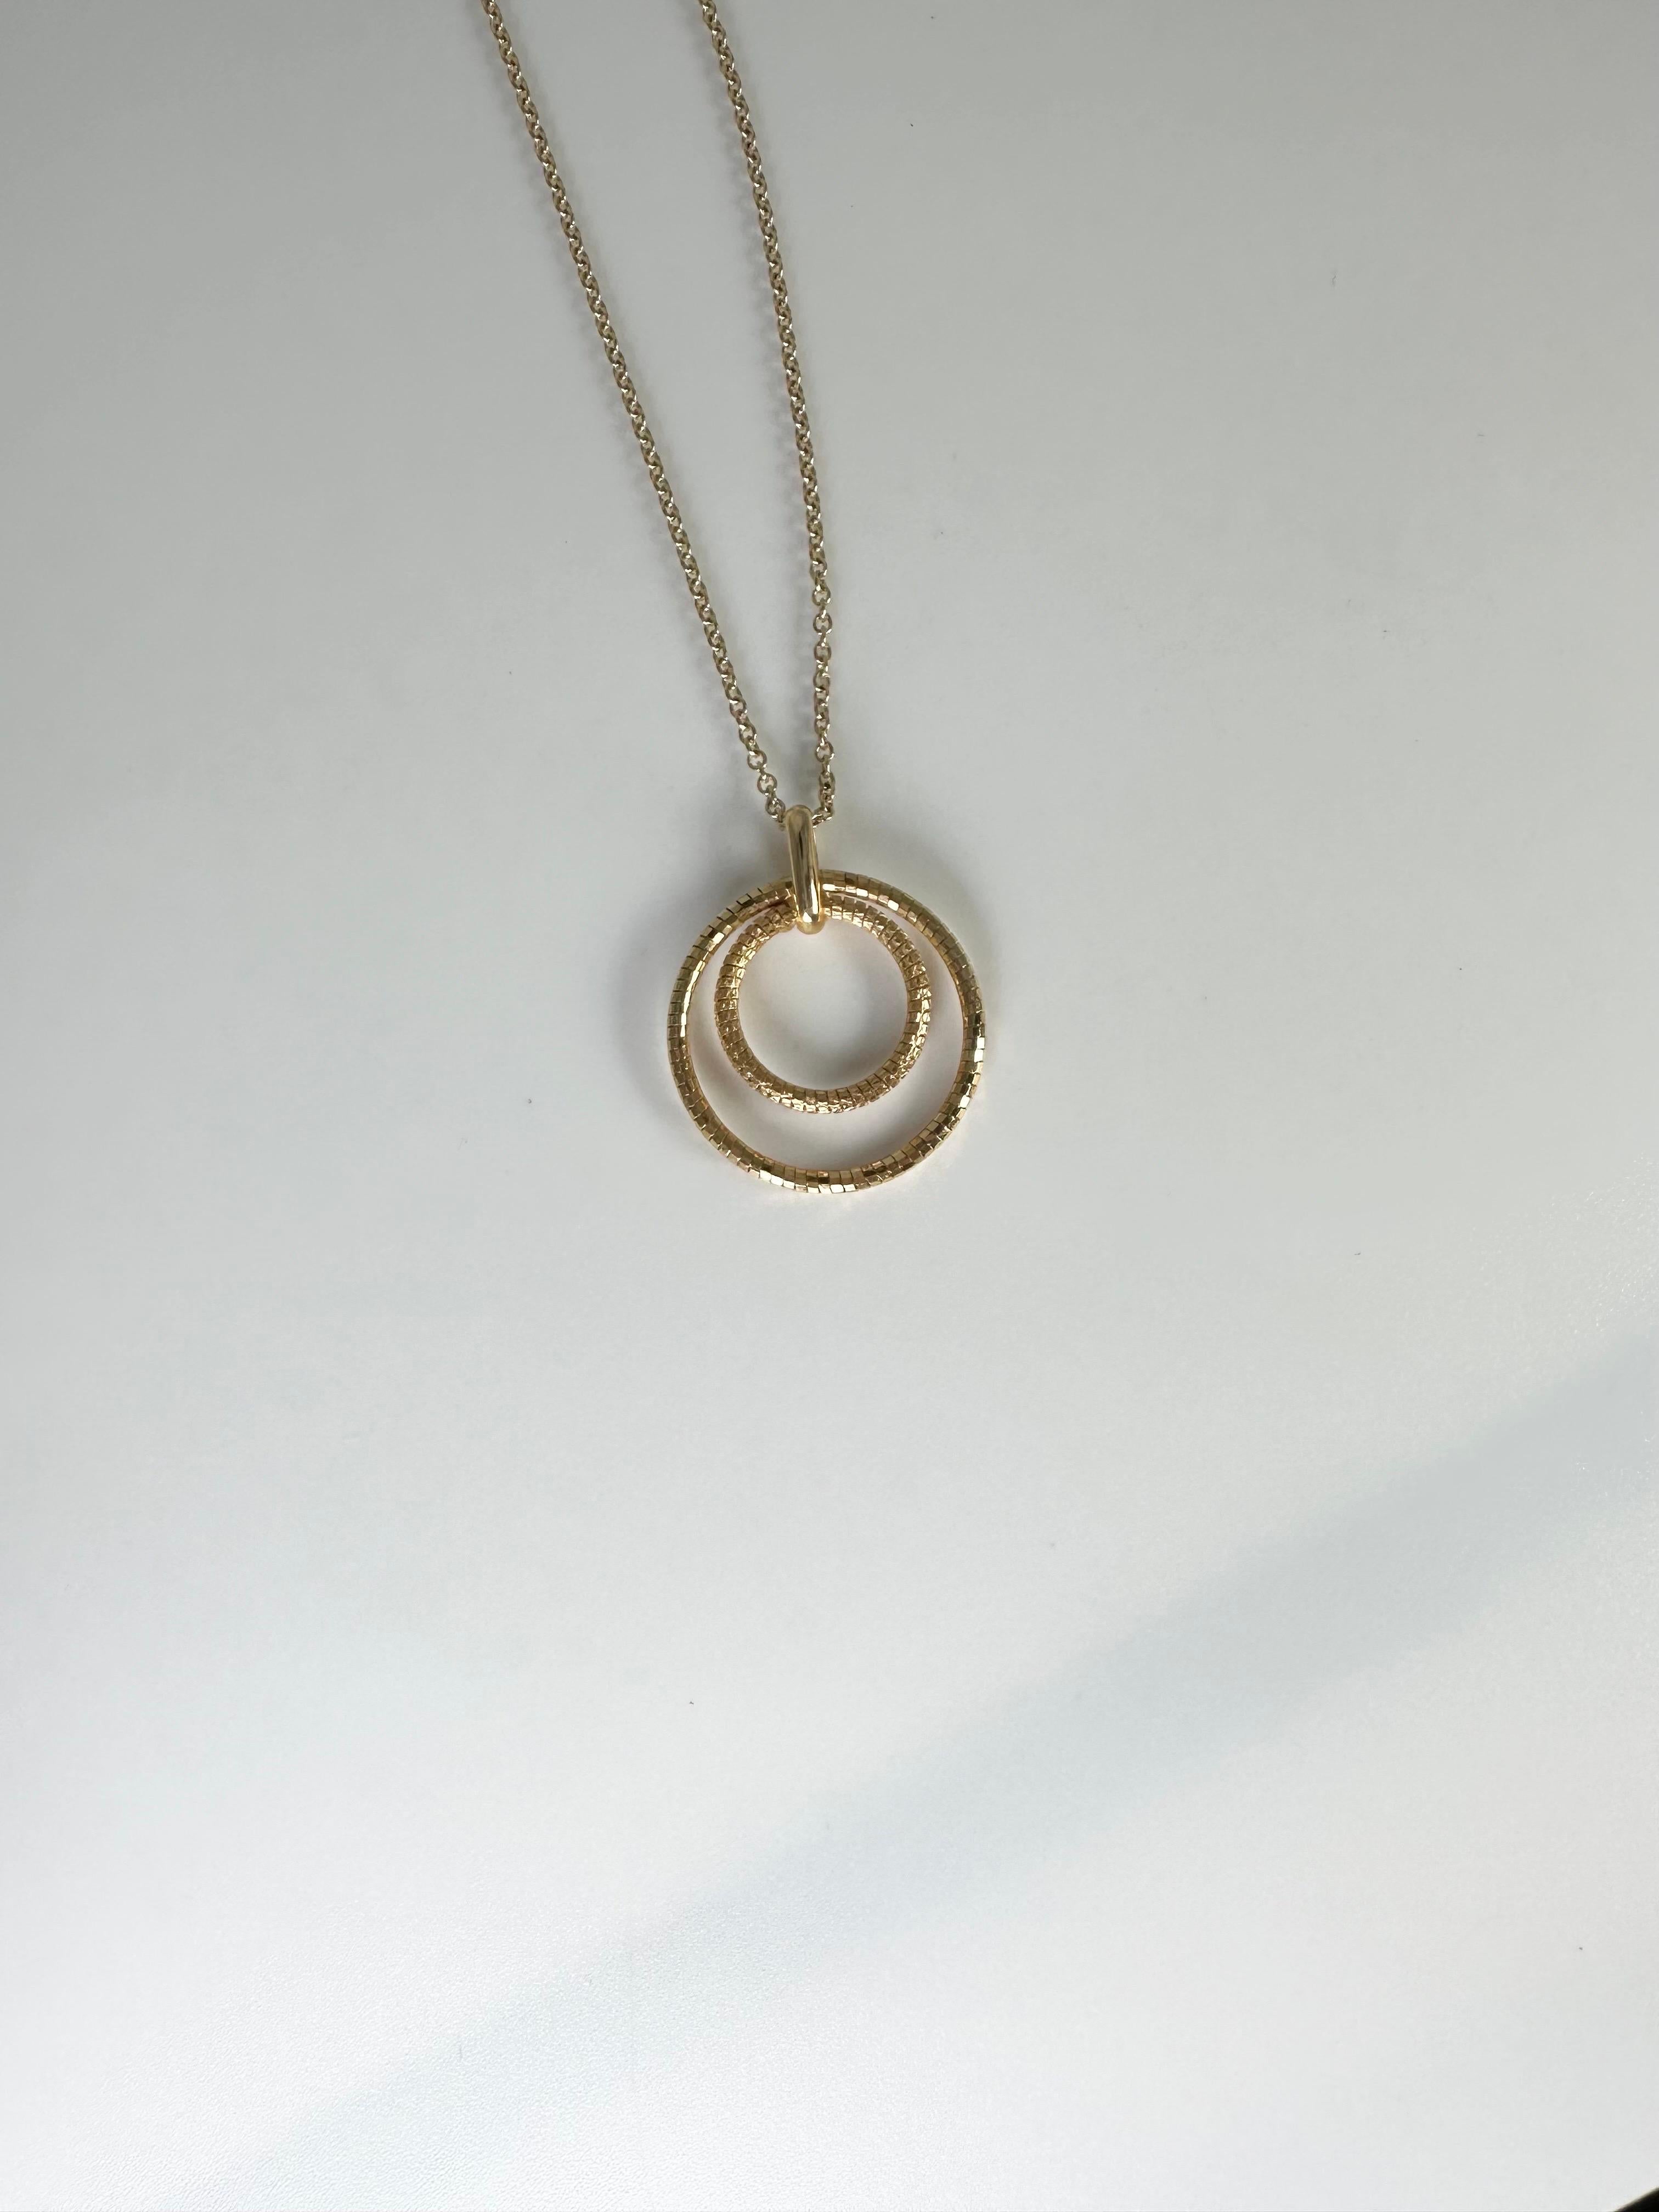 Modern textured circle pendant necklace in 14KT yellow gold, minimalistic pendant on 18 inches chain.
GOLD: 14KT gold
Grams:2.10
Item#: 435-00032OF

WHAT YOU GET AT STAMPAR JEWELERS:
Stampar Jewelers, located in the heart of Jupiter, Florida, is a